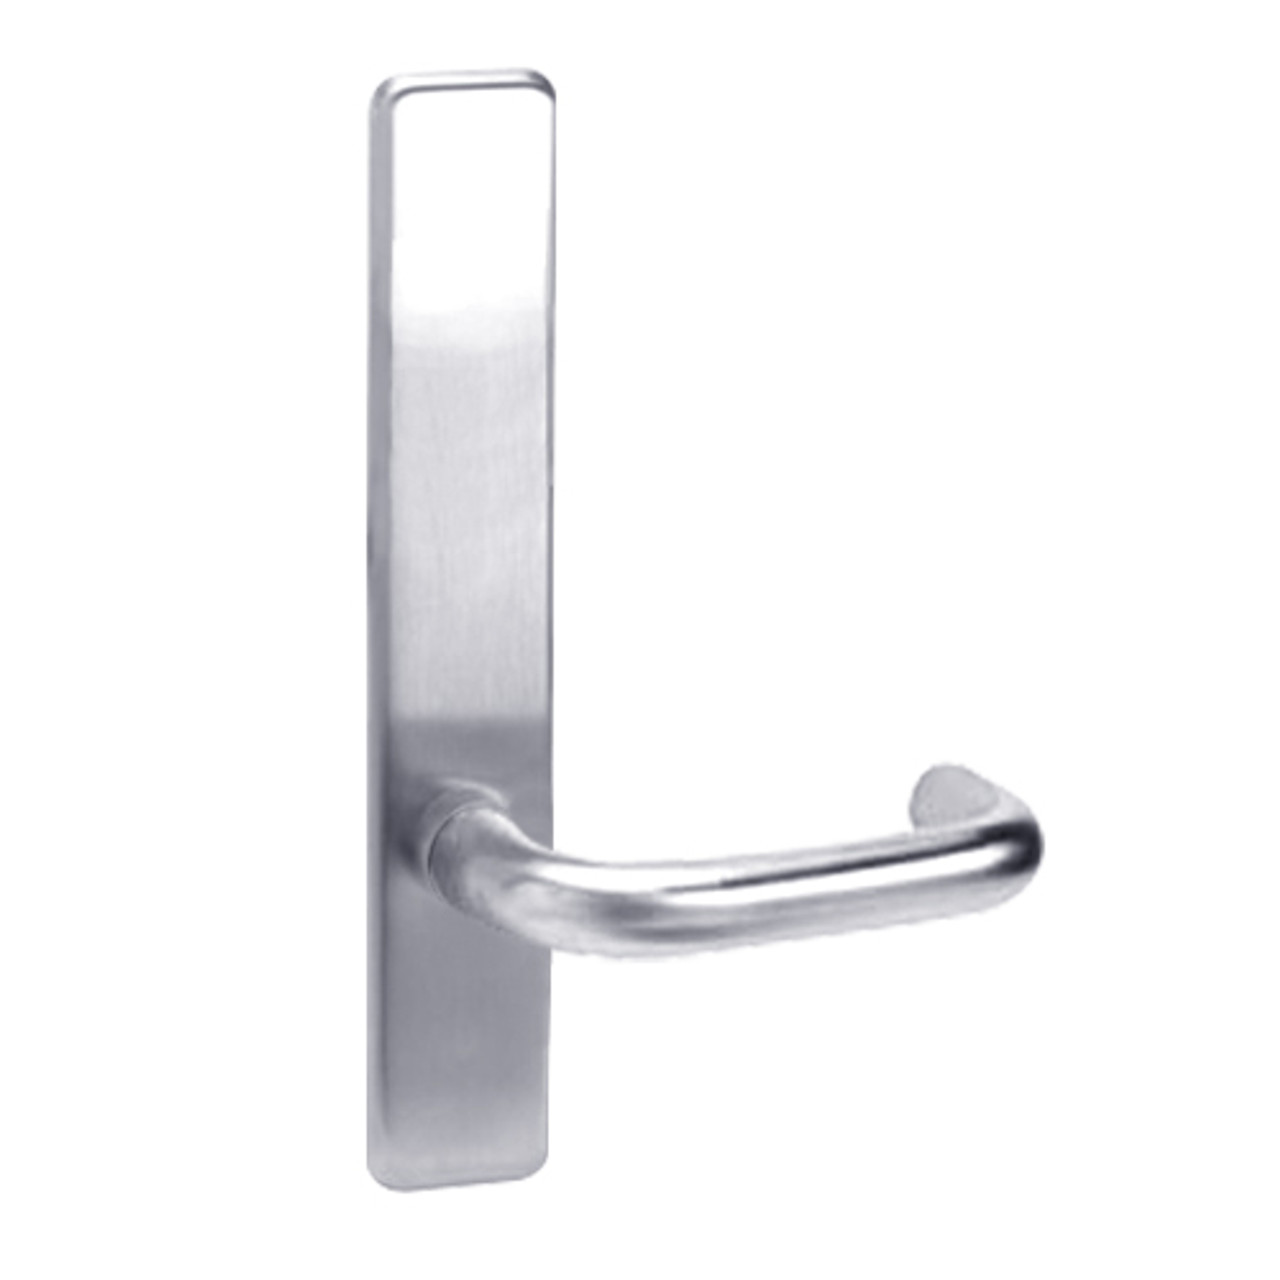 L810-625-LHR Corbin ED4000 Series Exit Device Trim with Passage Lustra Lever in Bright Chrome Finish